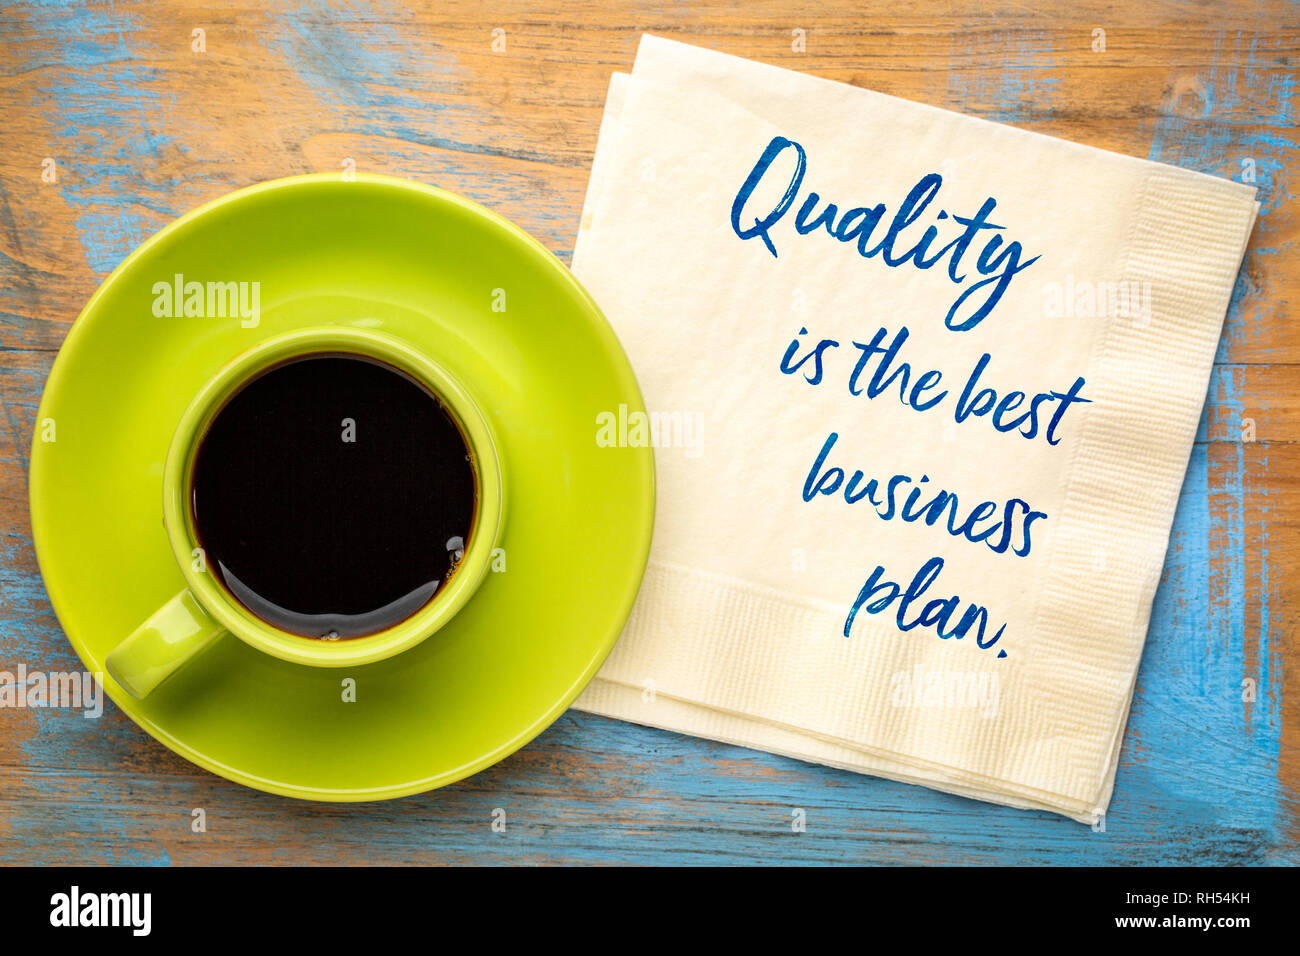 Quality is the best business plan - handwriting on a napkin with a cup of coffee Stock Photo